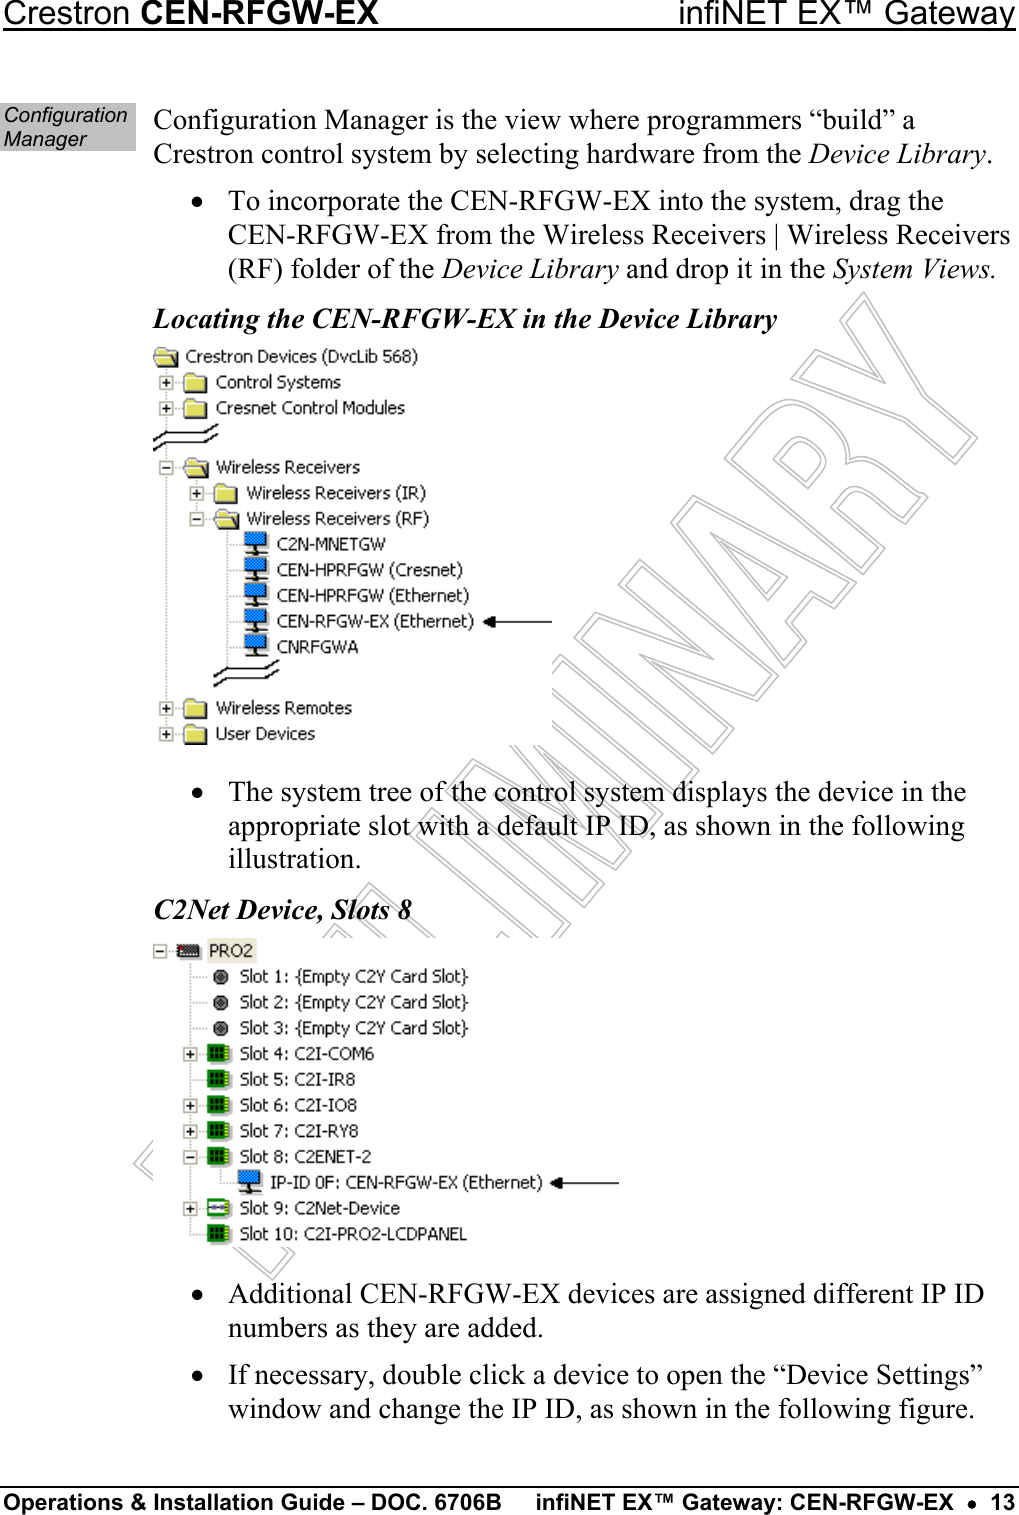   Crestron CEN-RFGW-EX  infiNET EX™ Gateway Operations &amp; Installation Guide – DOC. 6706B  infiNET EX™ Gateway: CEN-RFGW-EX  •  13 Configuration Manager  Configuration Manager is the view where programmers “build” a Crestron control system by selecting hardware from the Device Library. •  To incorporate the CEN-RFGW-EX into the system, drag the CEN-RFGW-EX from the Wireless Receivers | Wireless Receivers (RF) folder of the Device Library and drop it in the System Views. Locating the CEN-RFGW-EX in the Device Library •  The system tree of the control system displays the device in the appropriate slot with a default IP ID, as shown in the following illustration. C2Net Device, Slots 8 •  Additional CEN-RFGW-EX devices are assigned different IP ID numbers as they are added. •  If necessary, double click a device to open the “Device Settings” window and change the IP ID, as shown in the following figure.  